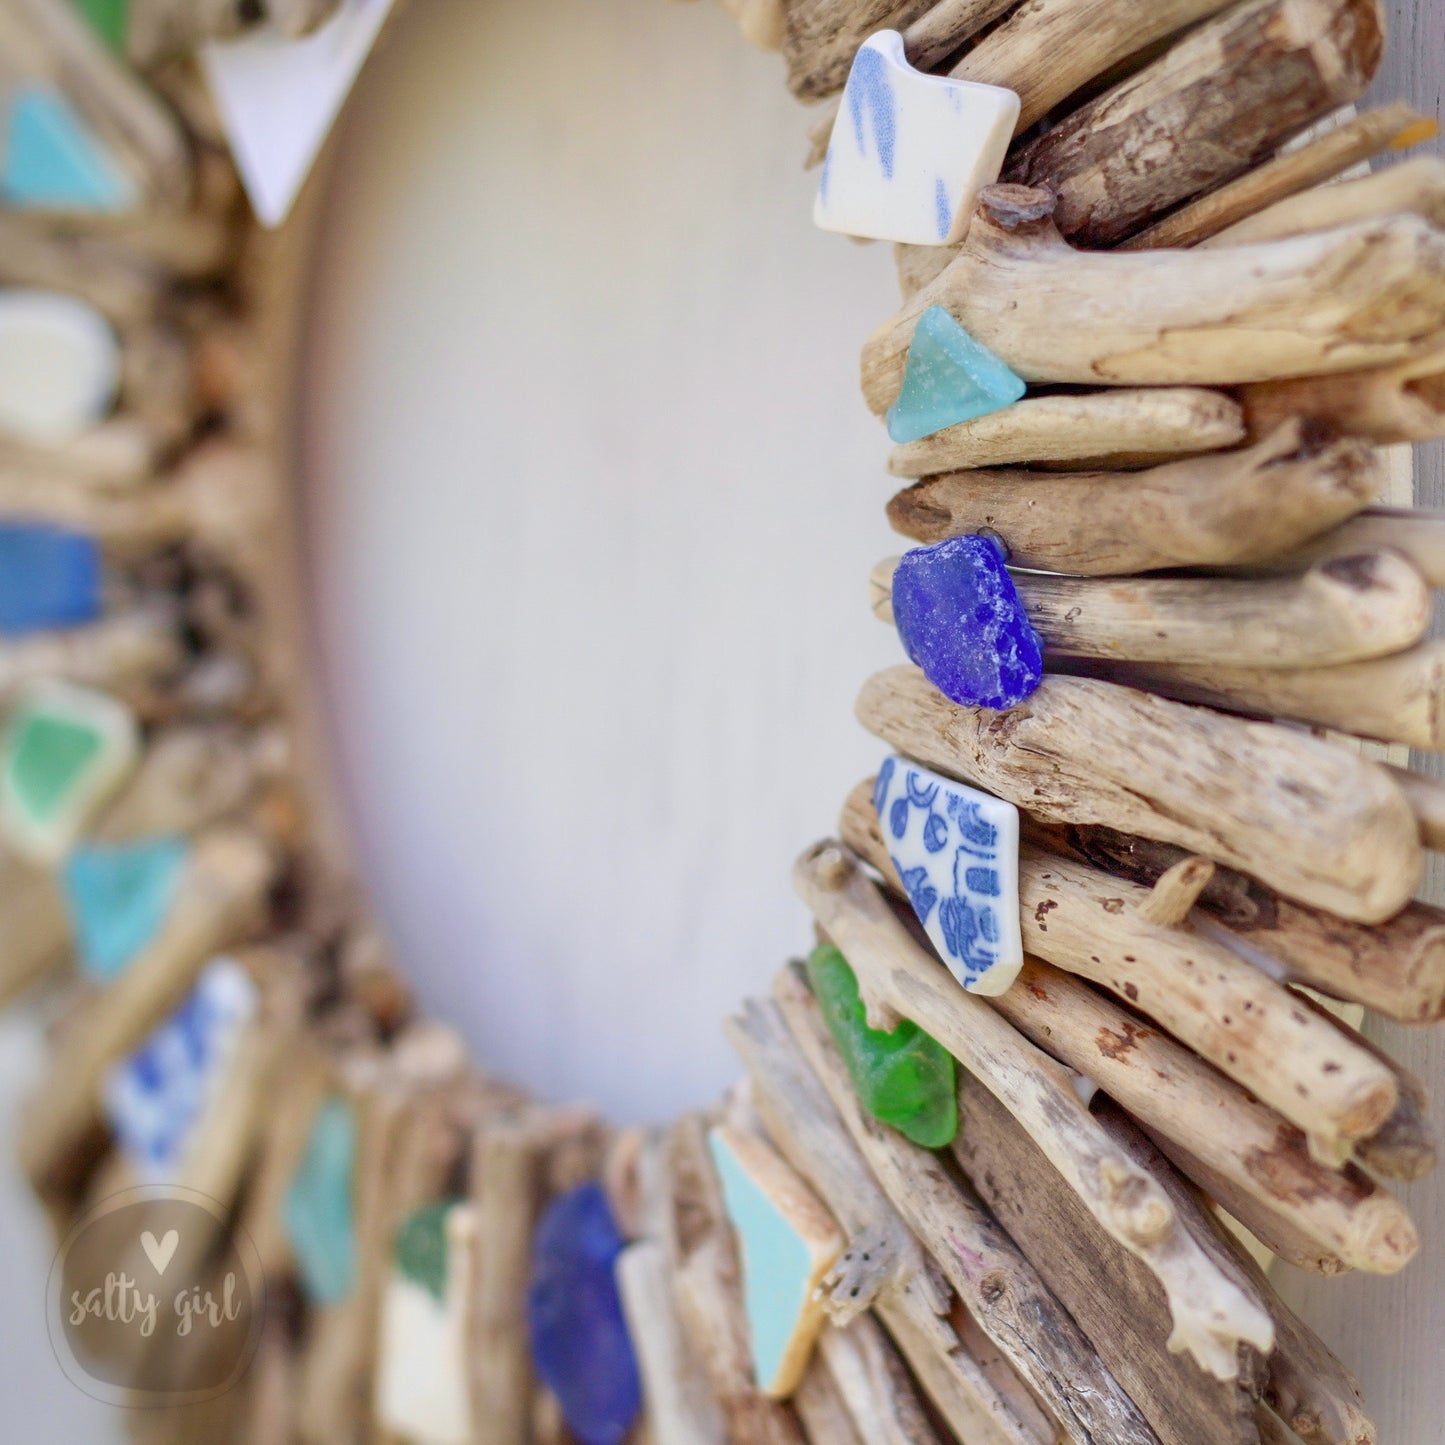 Driftwood Wreath - Boho Style with Beach Pottery and Sea Glass Accents - Sizes 12" - 16" - 20”